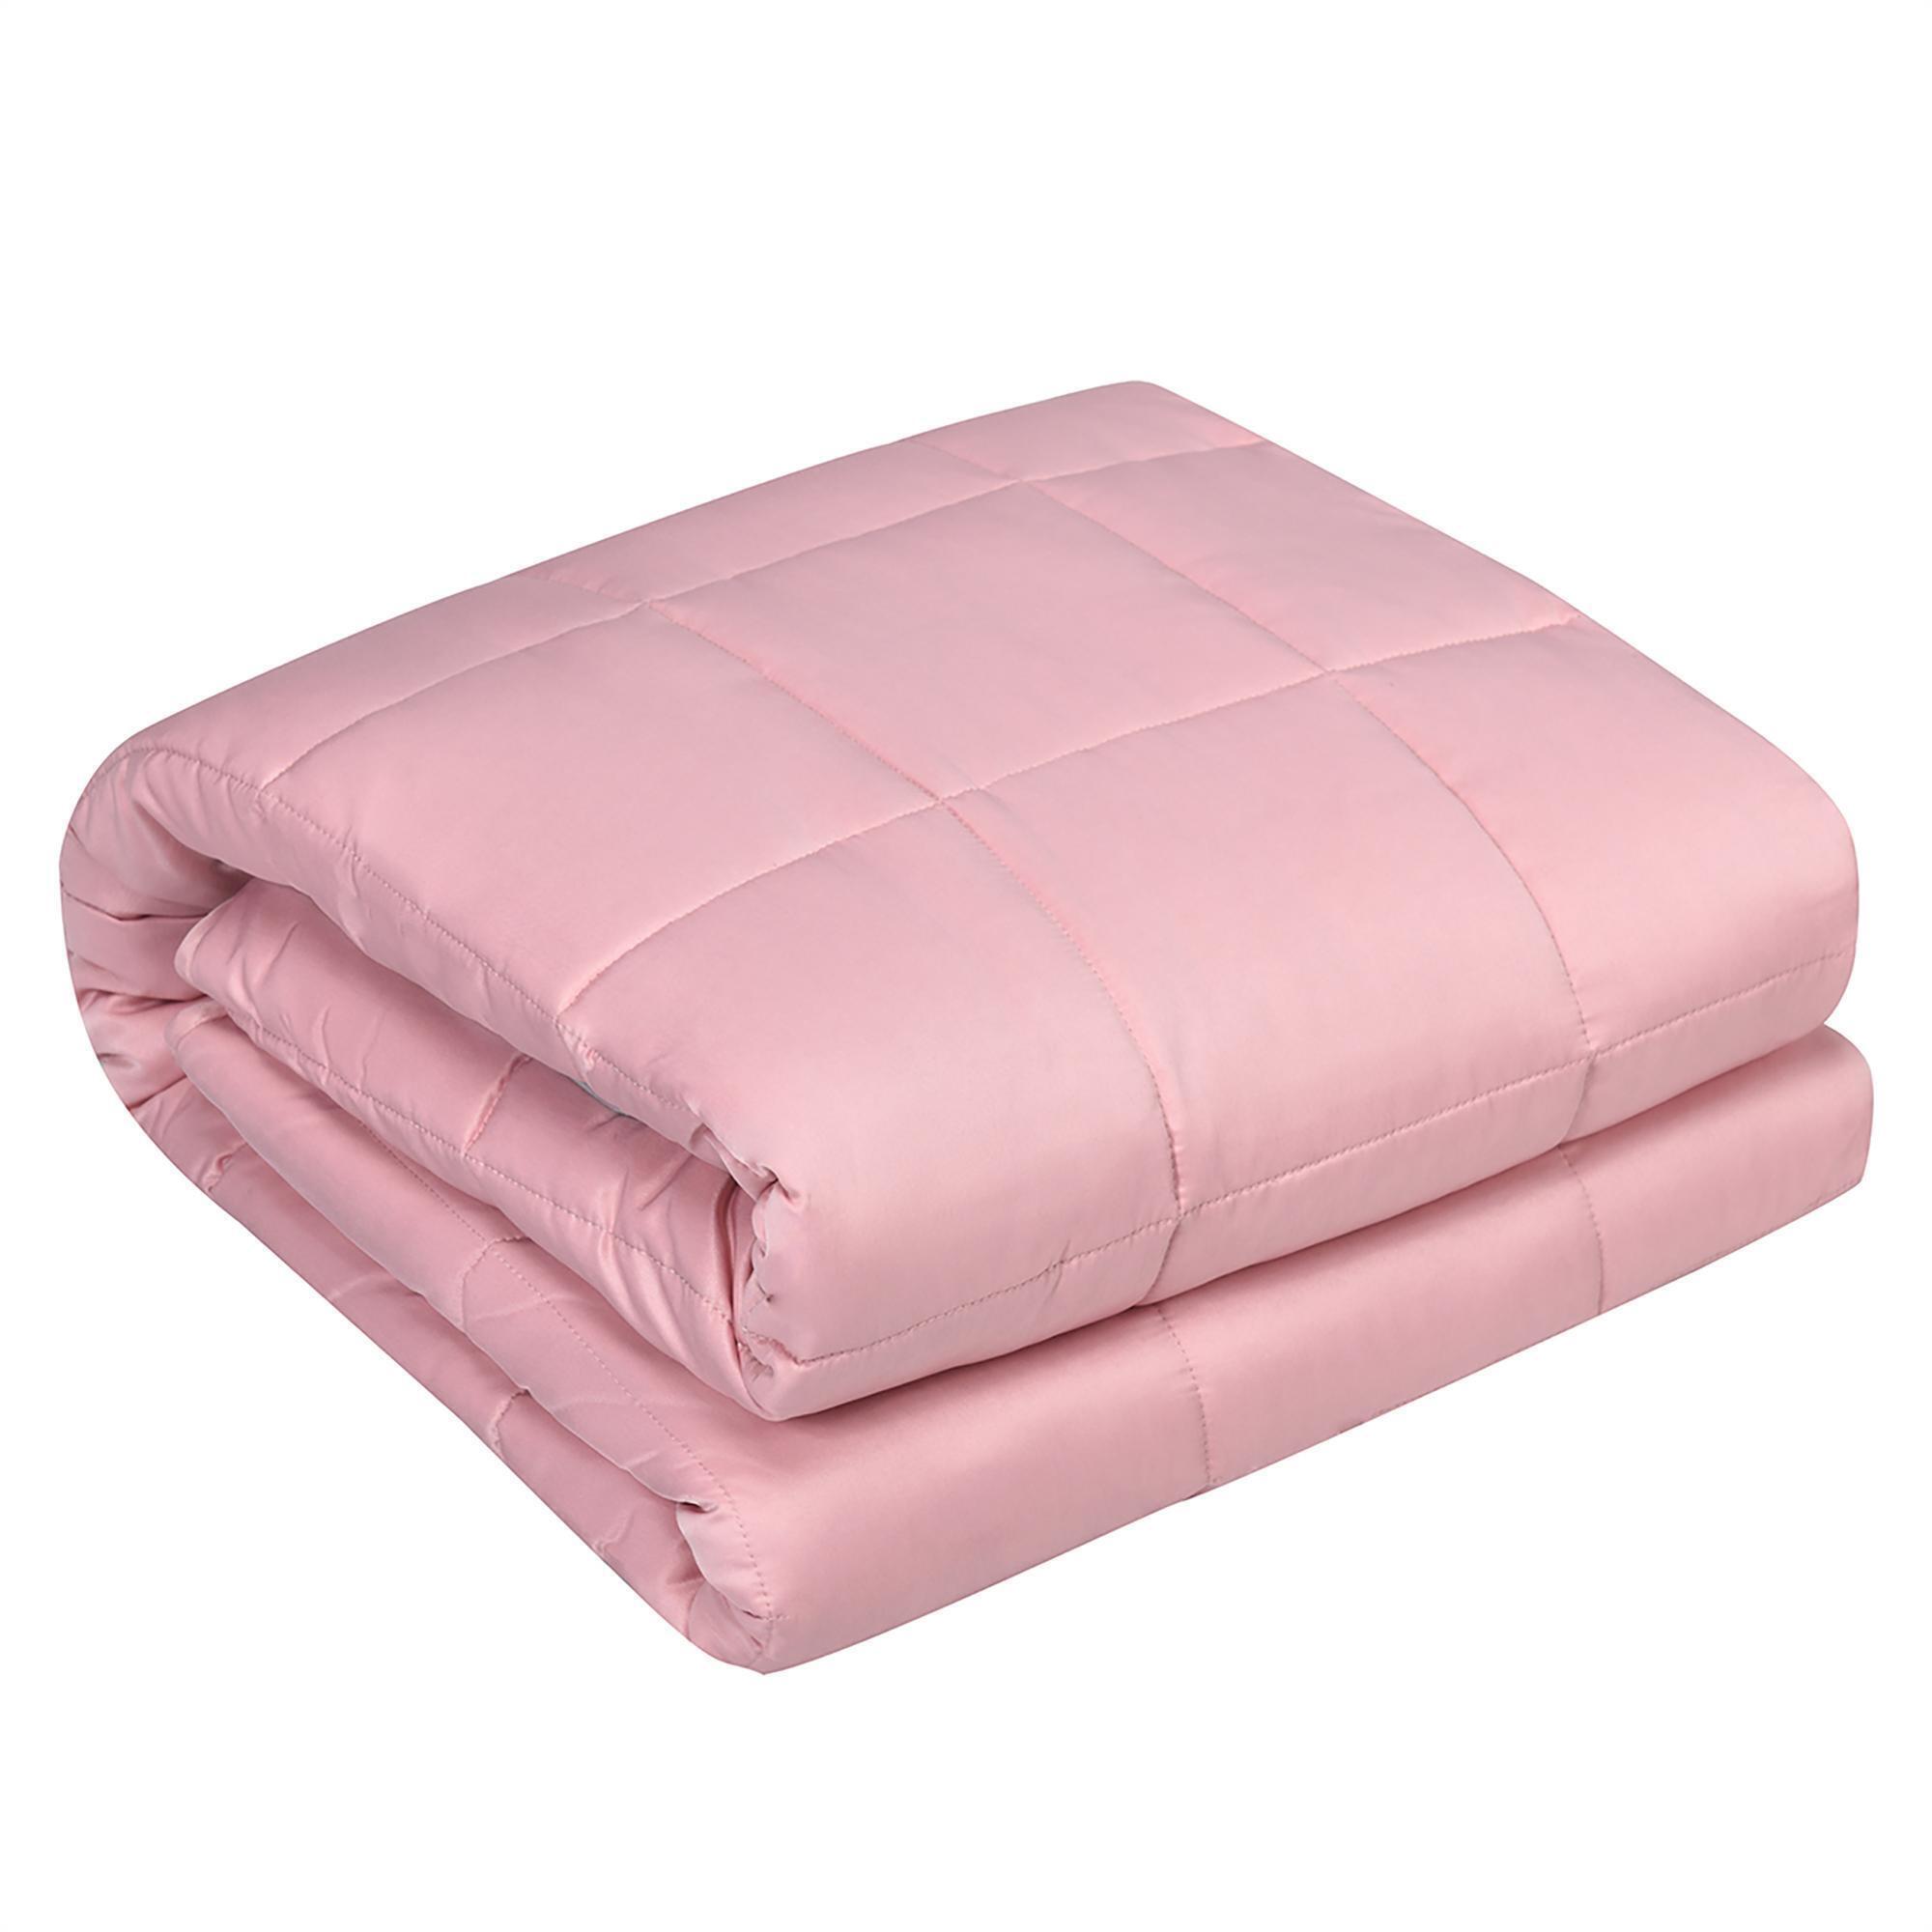 Costway 20lbs Premium Cooling Heavy Weighted Blanket Soft Fabric Breathable 60